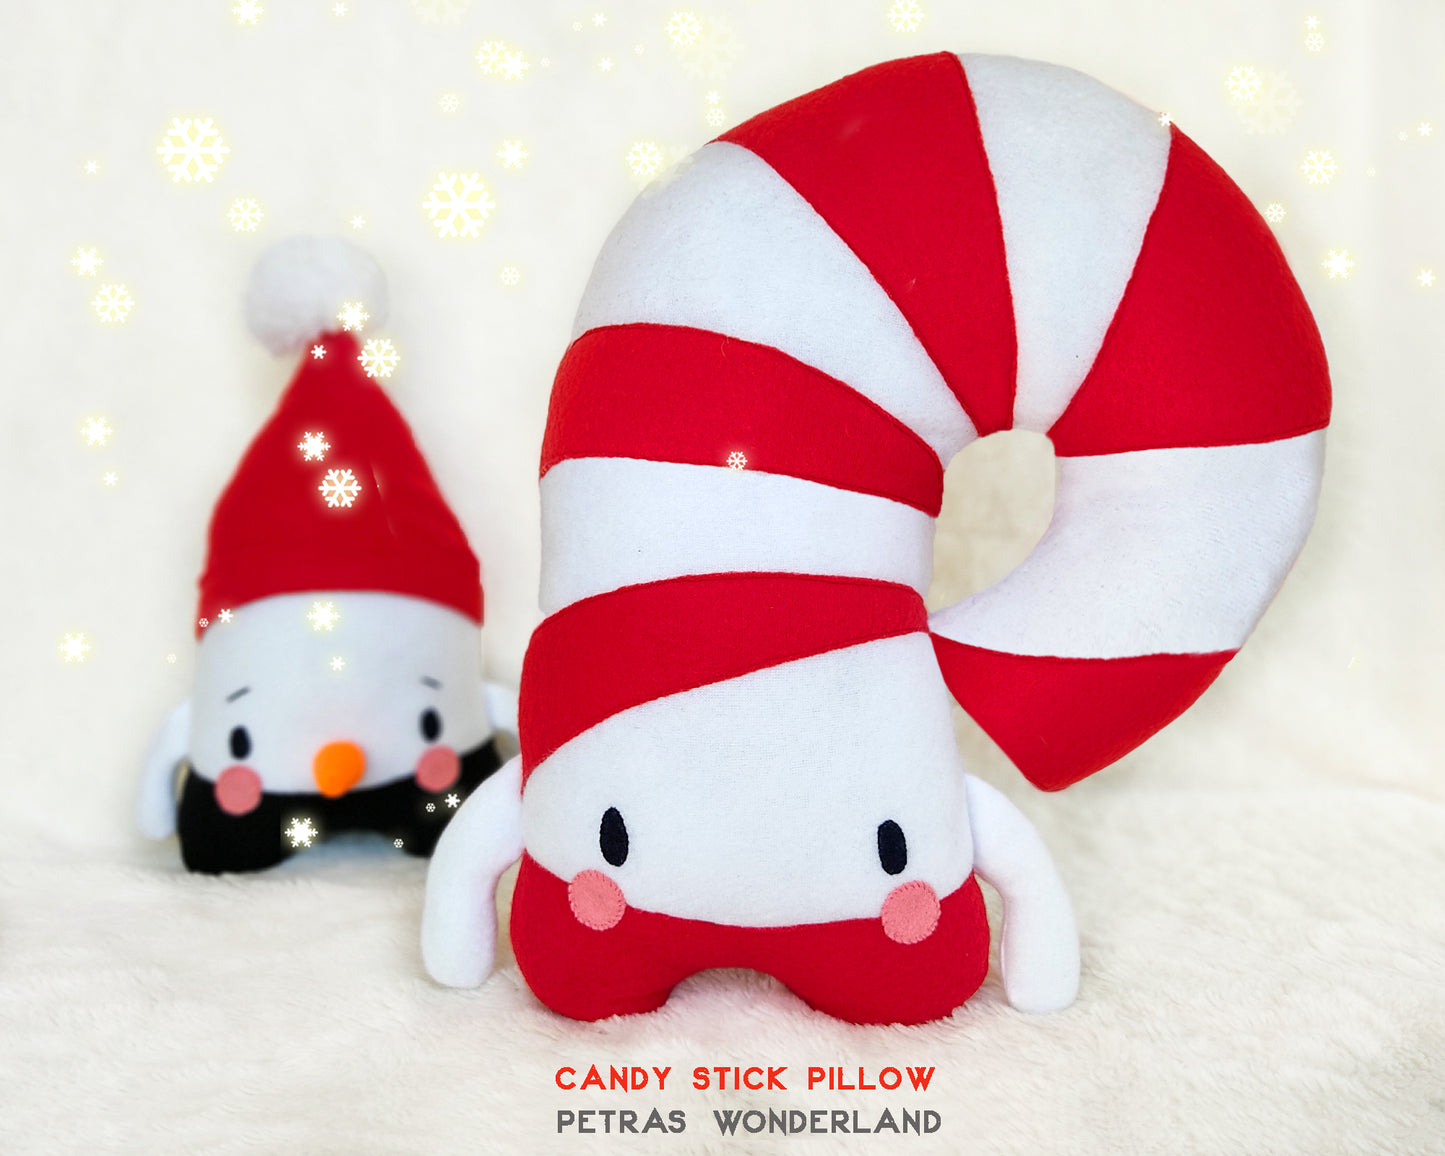 Christmas set of 2 patterns: Candy Stick Pillow and Snowman Toy - PDF toy sewing patterns and tutorials 02